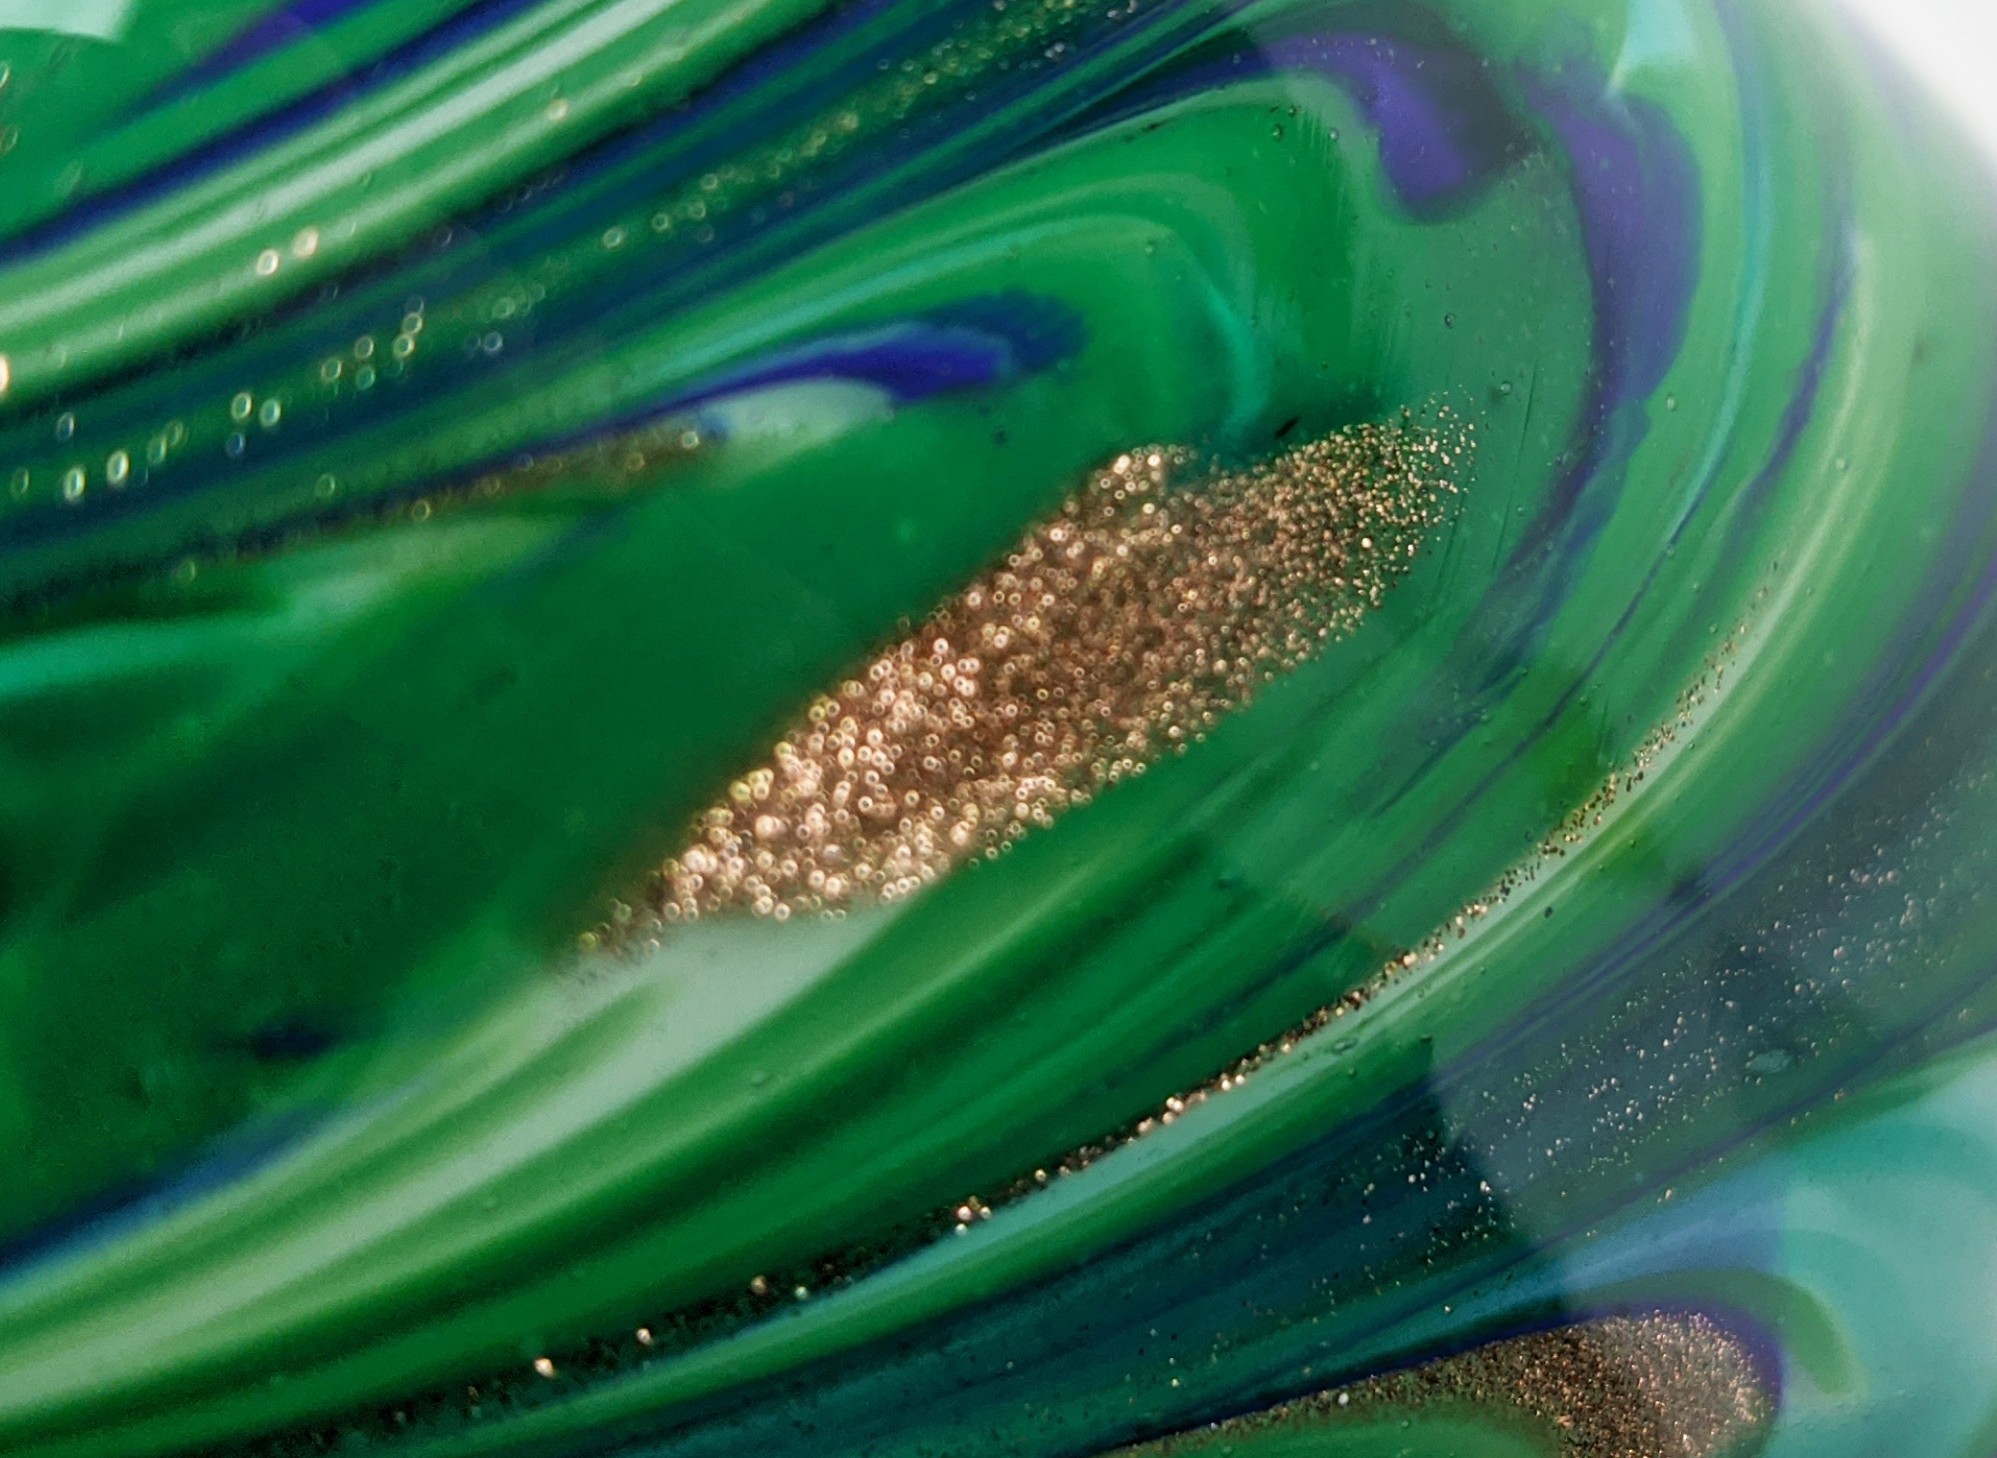 A MURANO GLASS VASE, of ovoid form, with a green, white and blue swirling pattern, gold flecks, 40cm - Image 5 of 7